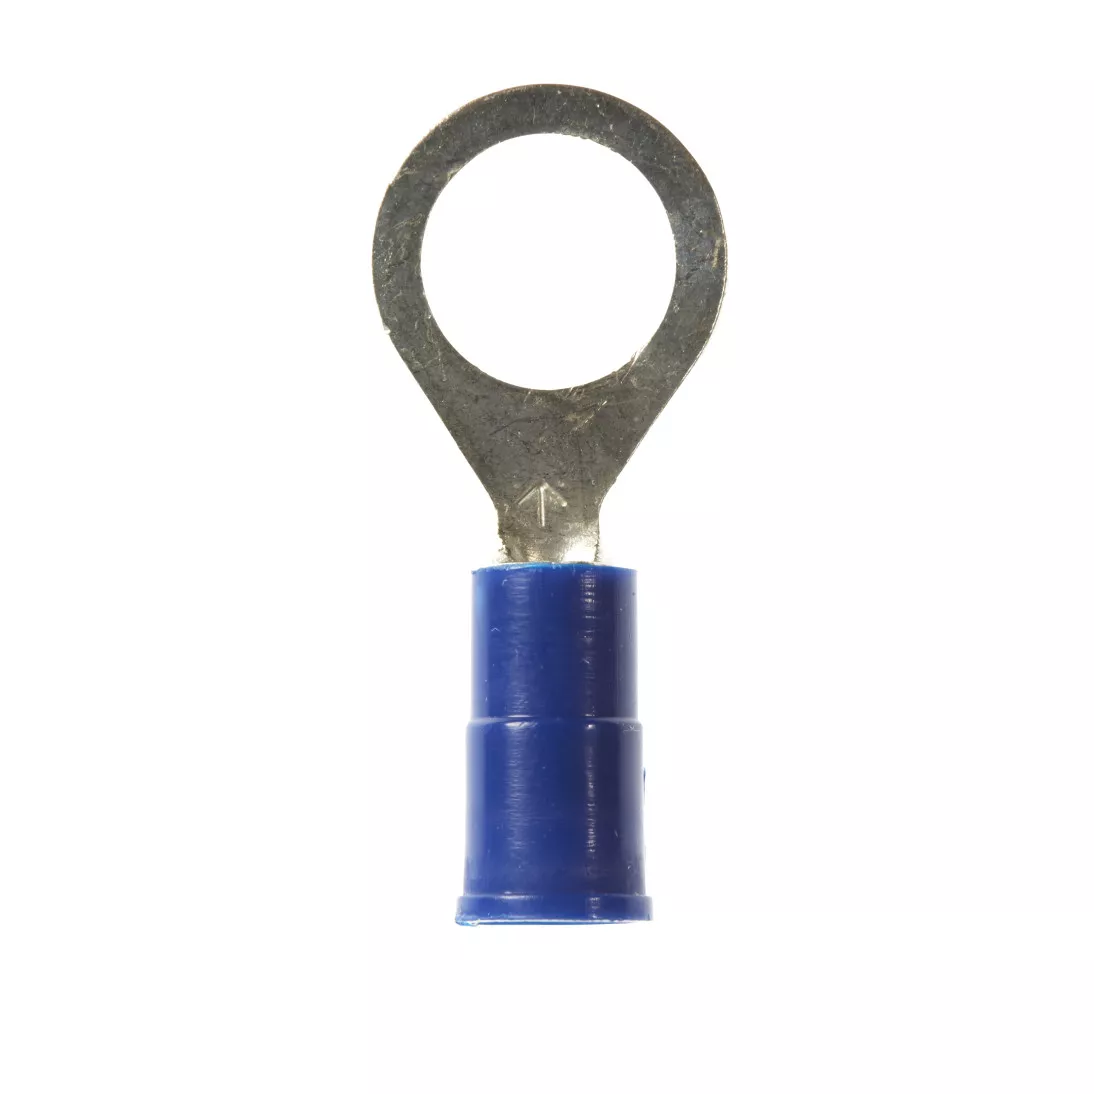 3M™ Scotchlok™ Ring Vinyl Insulated, 100/bottle, MV14-516R/SX,
standard-style ring tongue fits around the stud, 500/Case